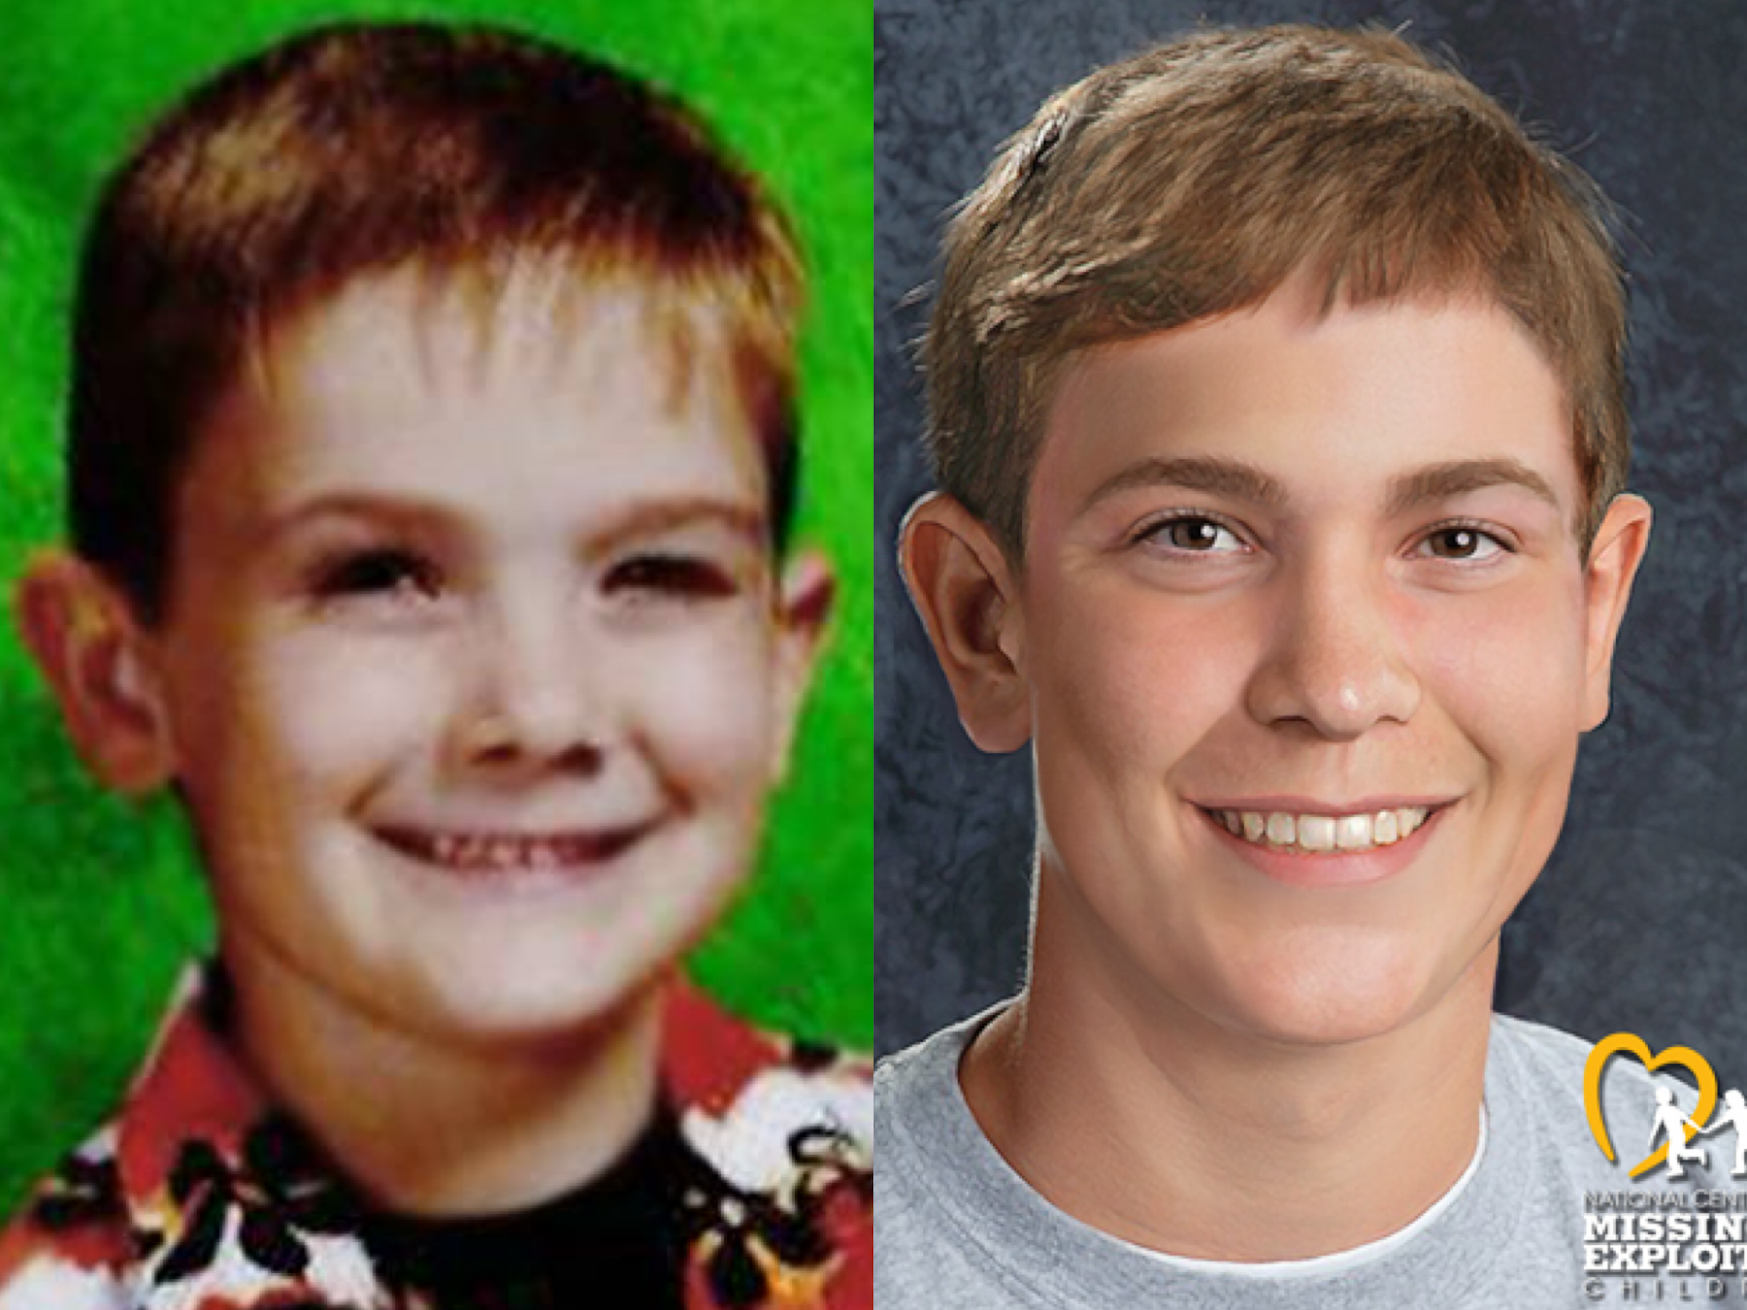 Timmothy Pitzen (pictured left as a child, and right in an age-progression image) has been missing since May 2011. His mother, Amy Fry-Pitzen, was found dead by suicide days later